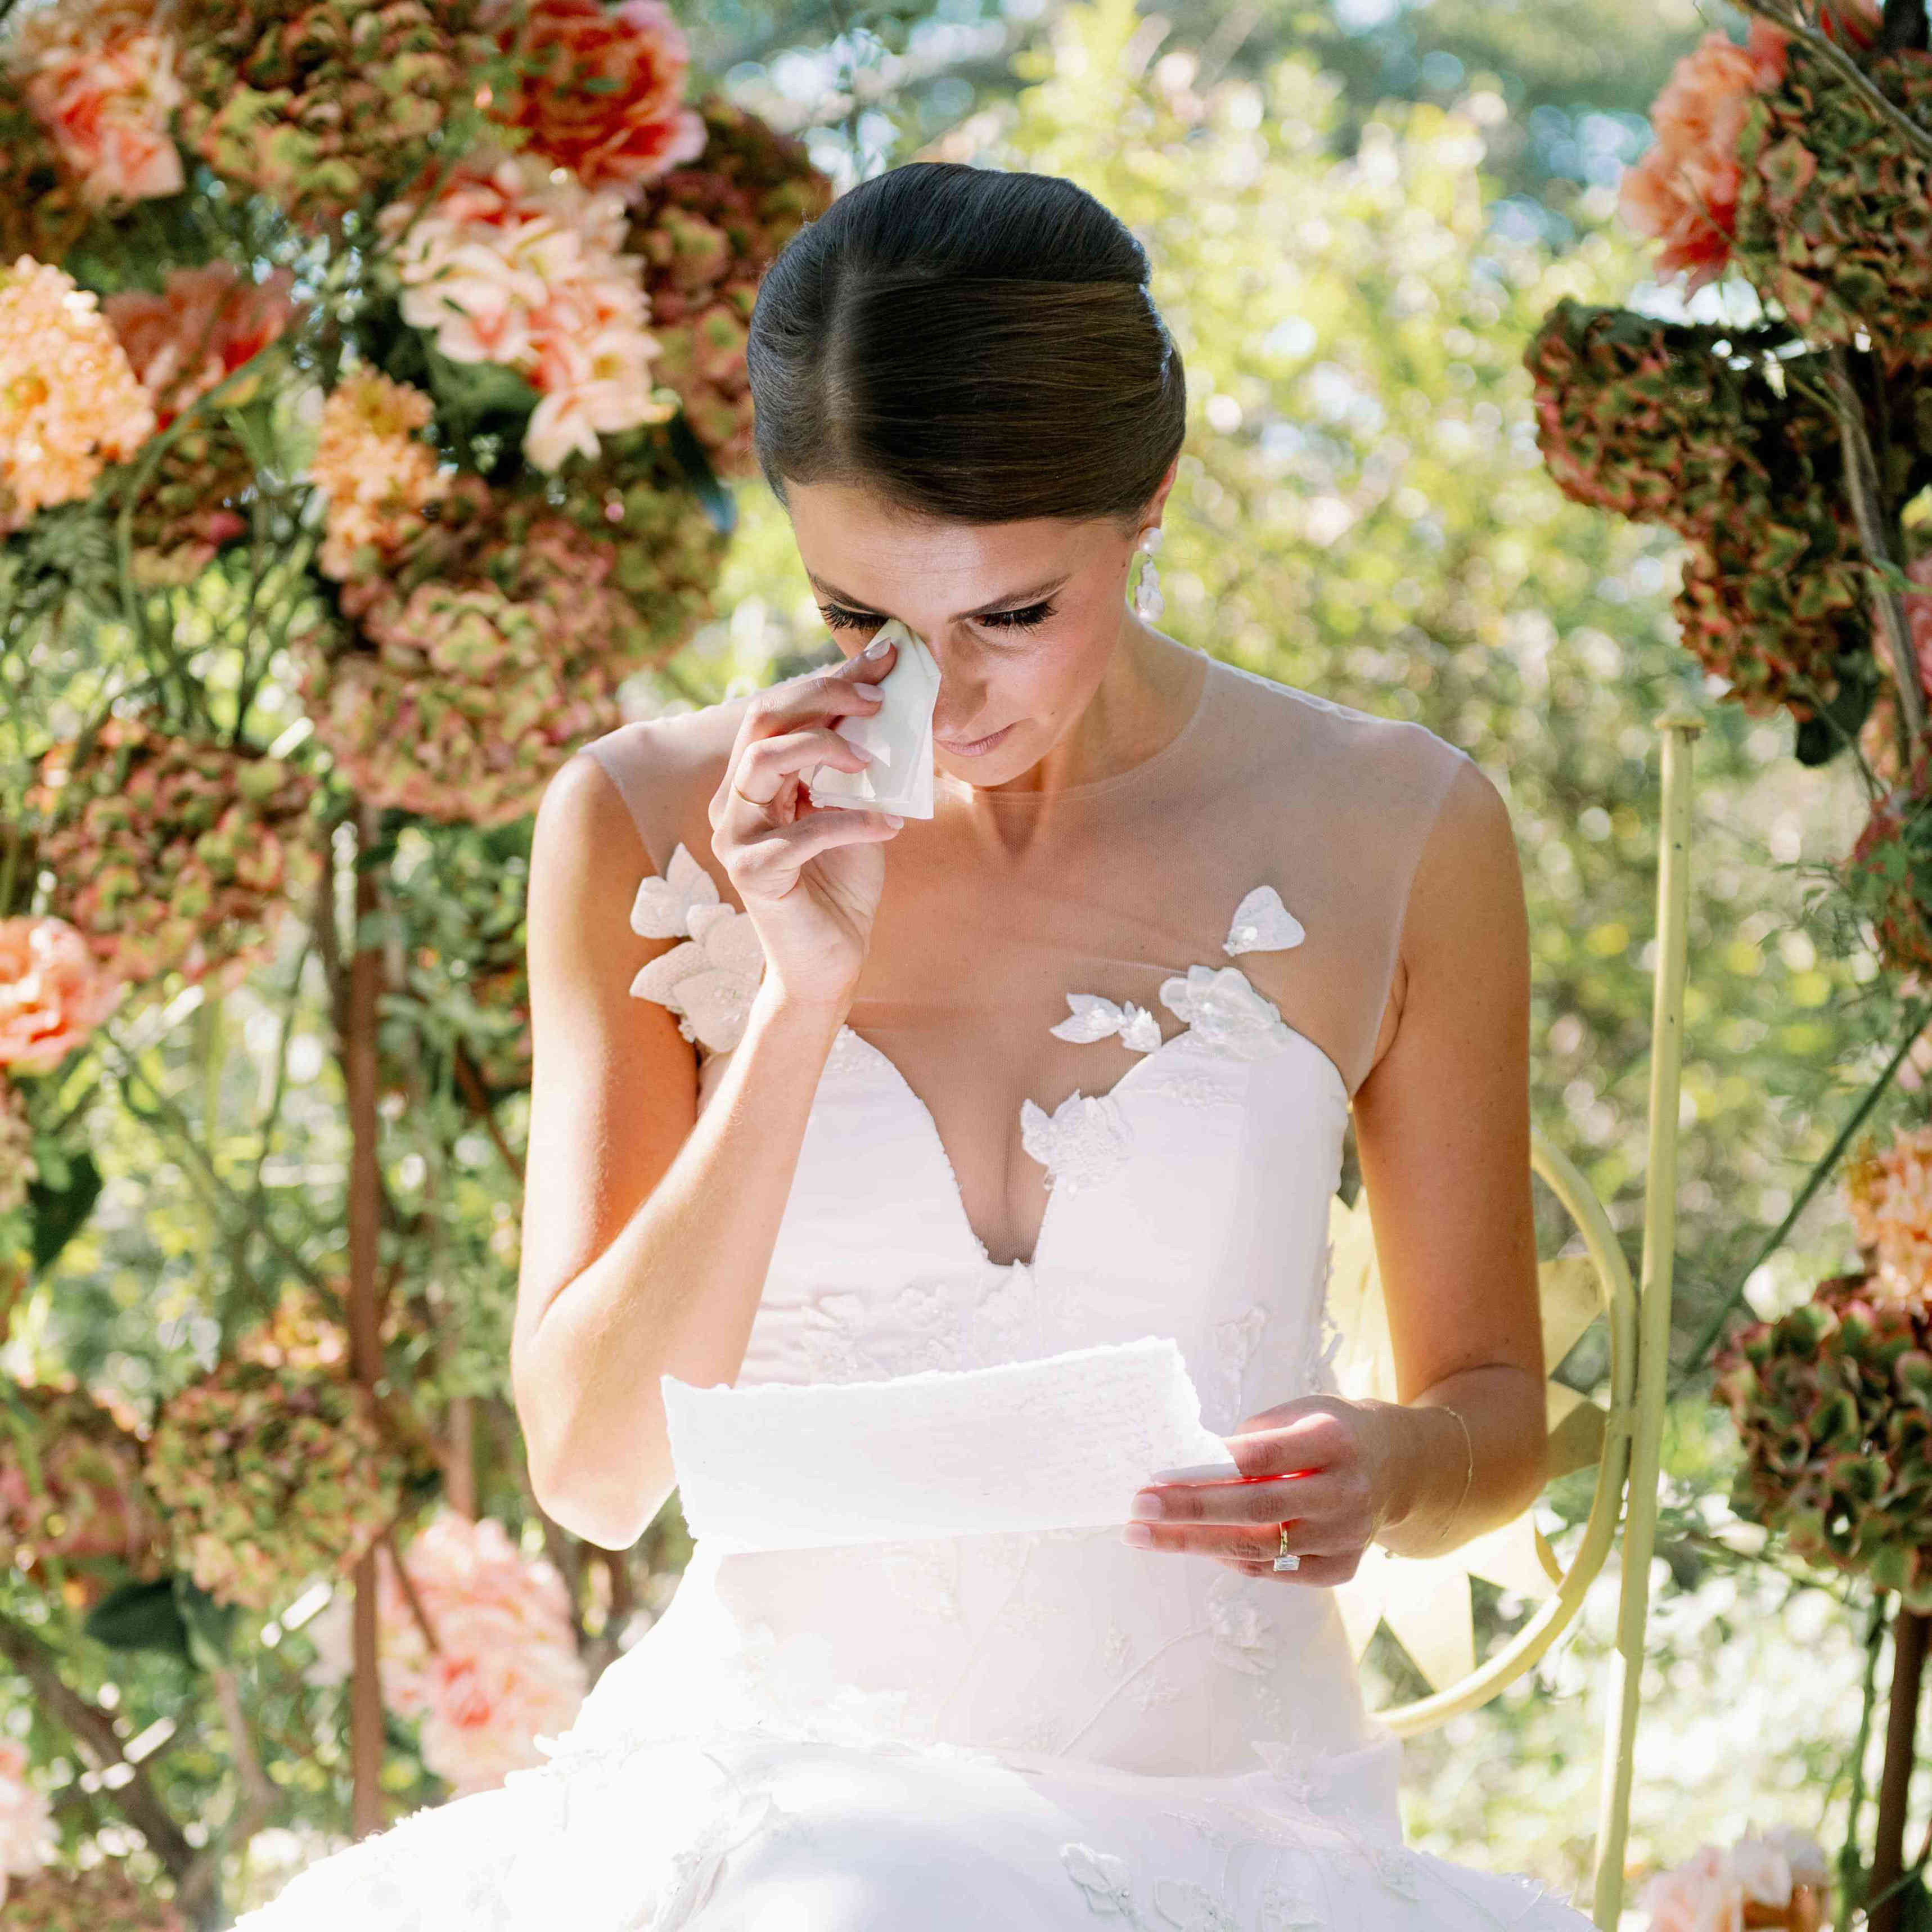 How to Write a Heartfelt Letter to the Bride If You're Her Bridesmaid ...